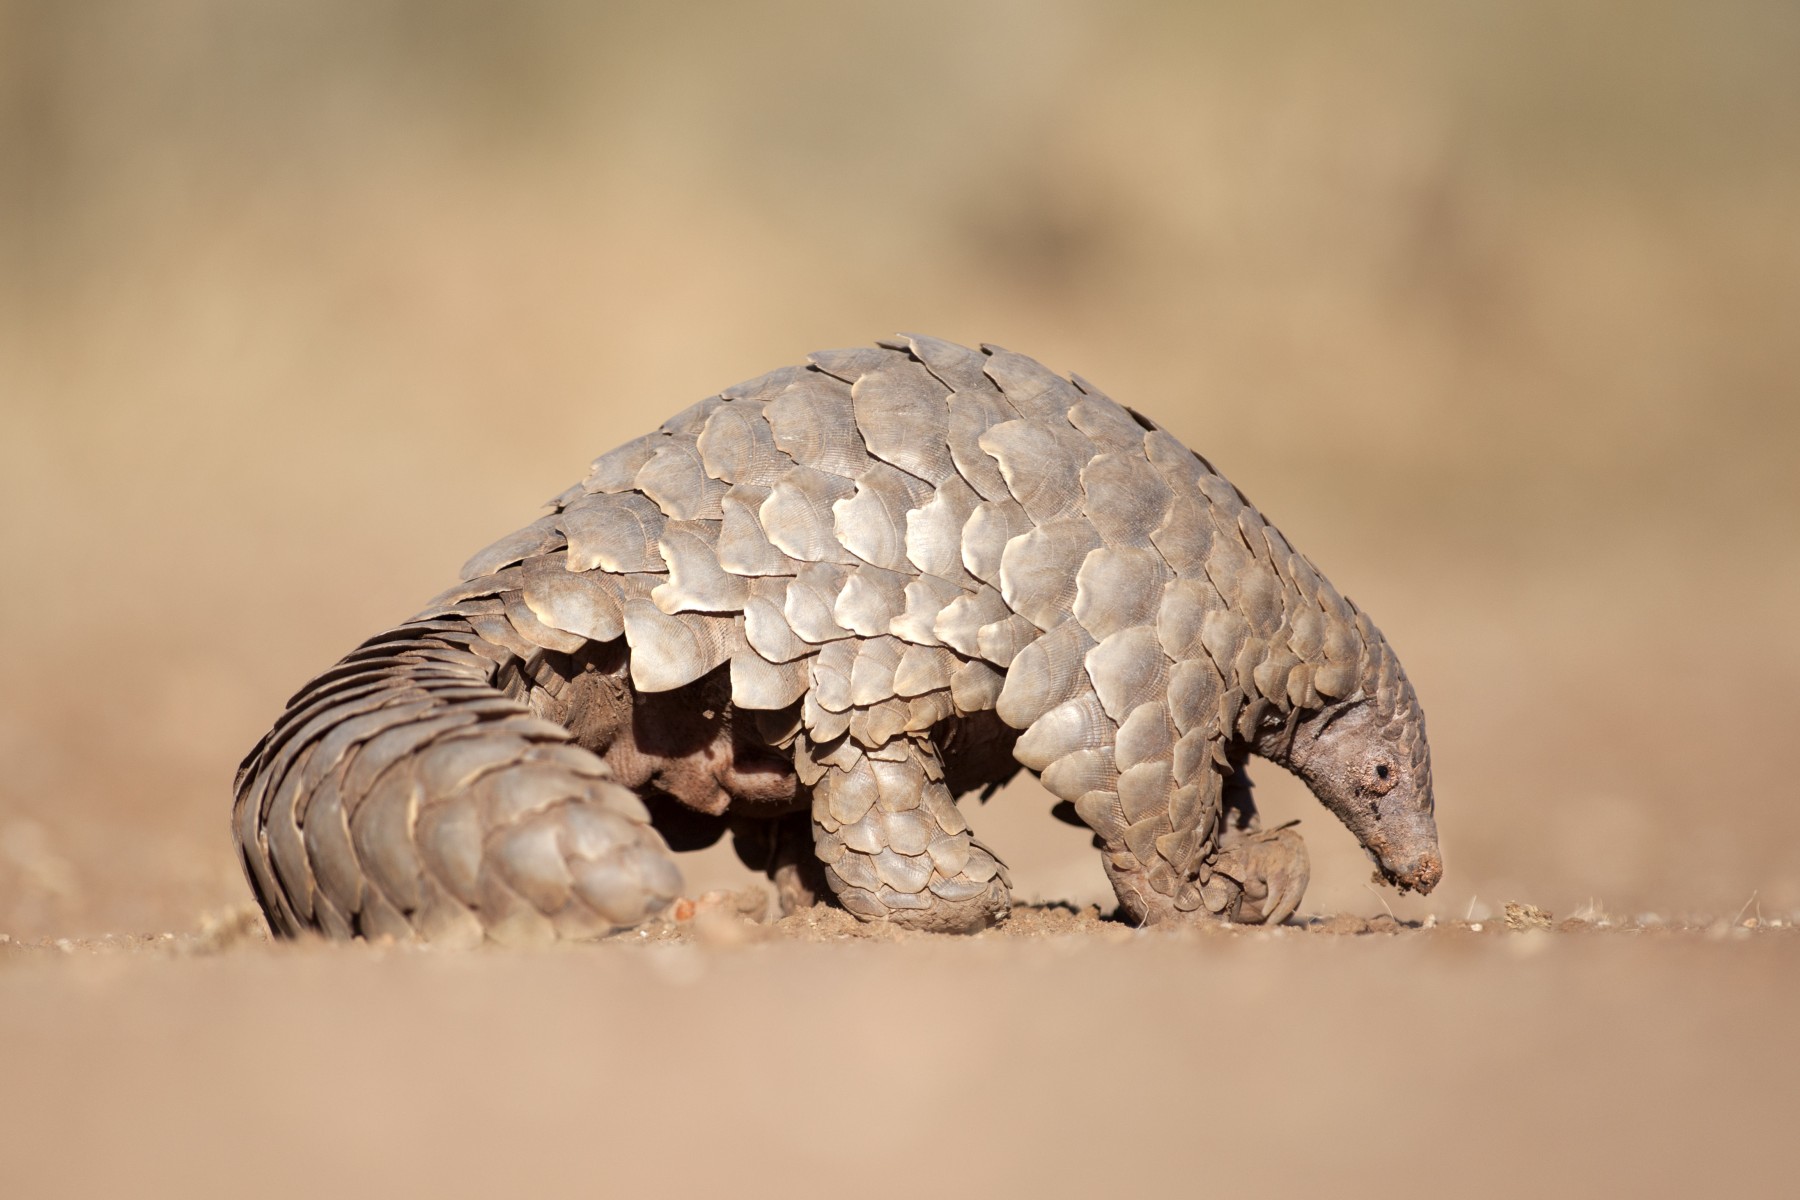 Pangolins are now considered the most heavily-trafficked animal in the world.